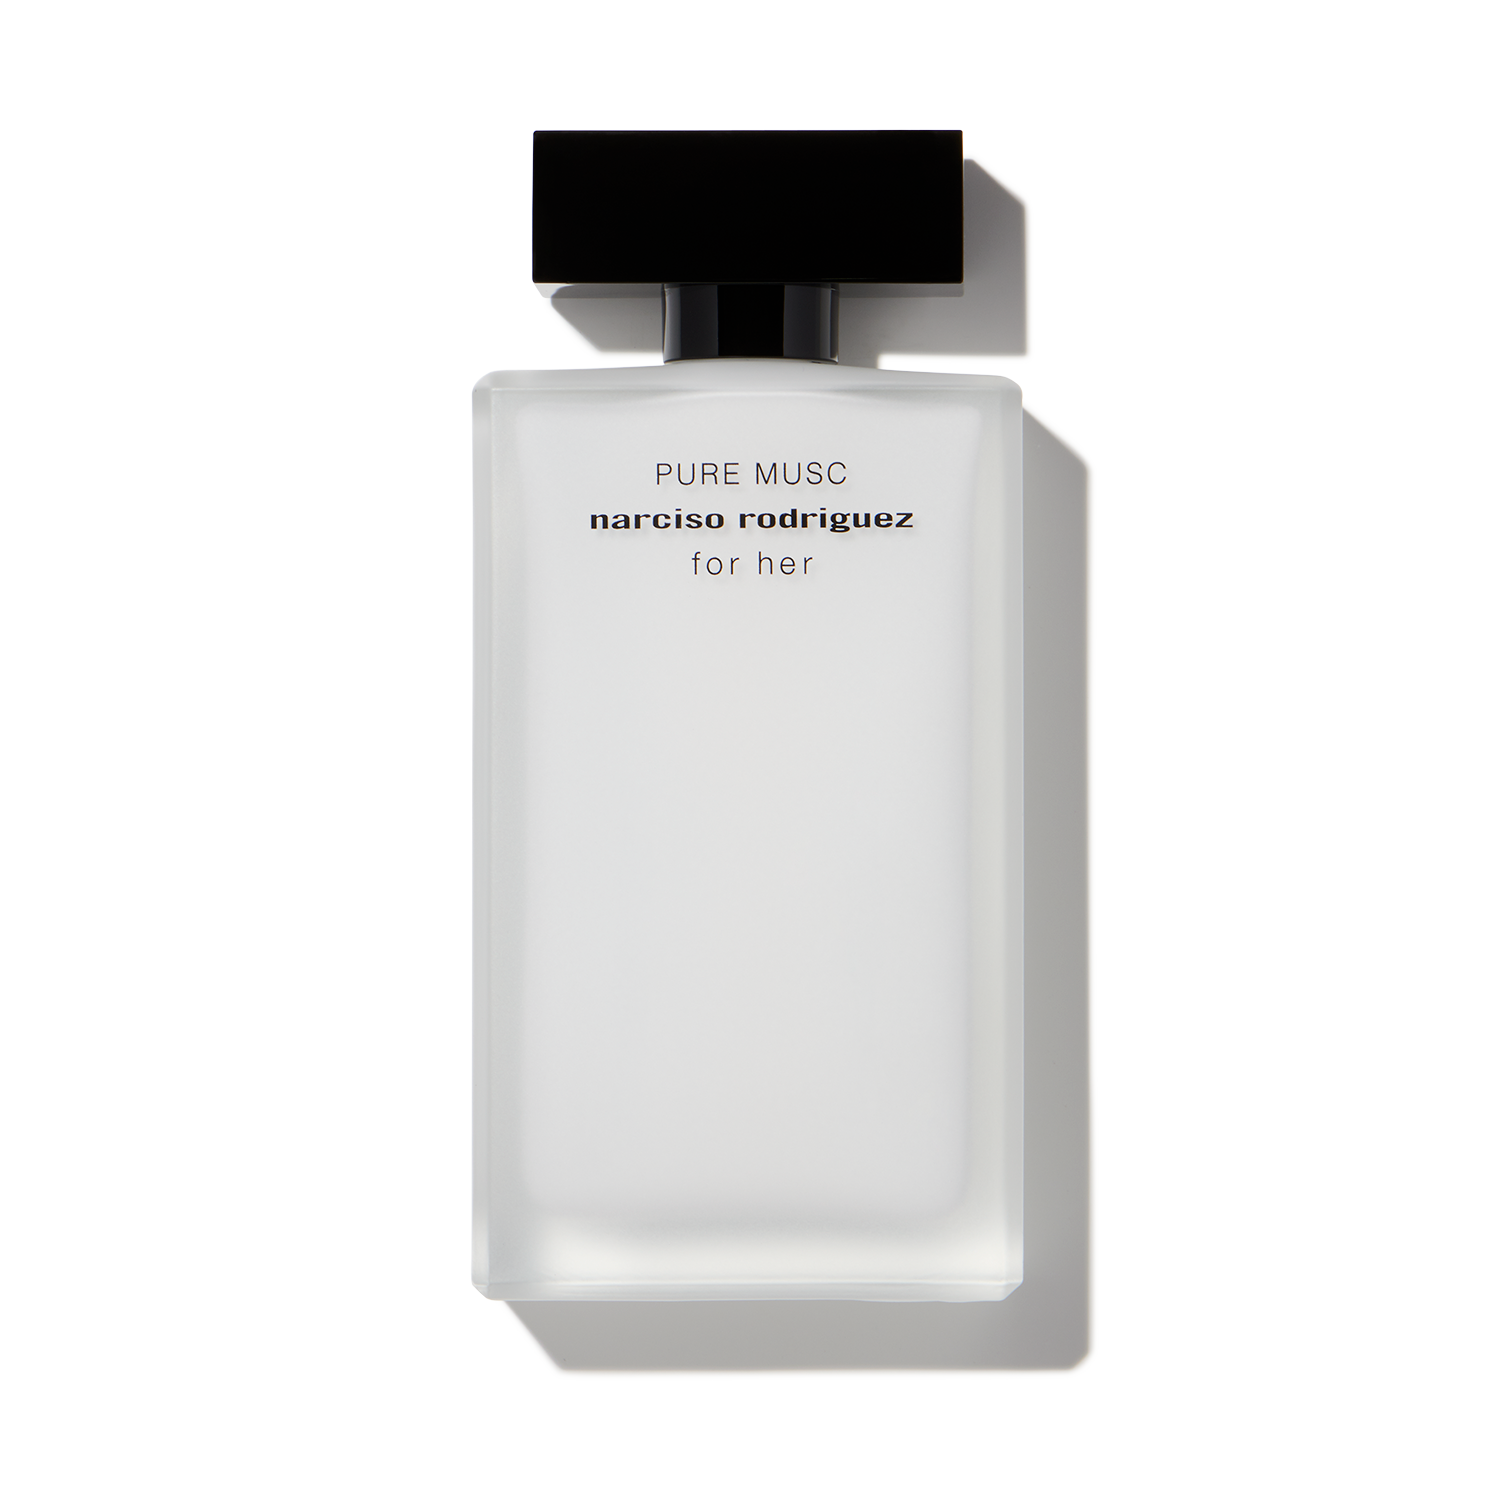 Narciso Rodriguez Musc per month for Pure $16.95 | Scentbird